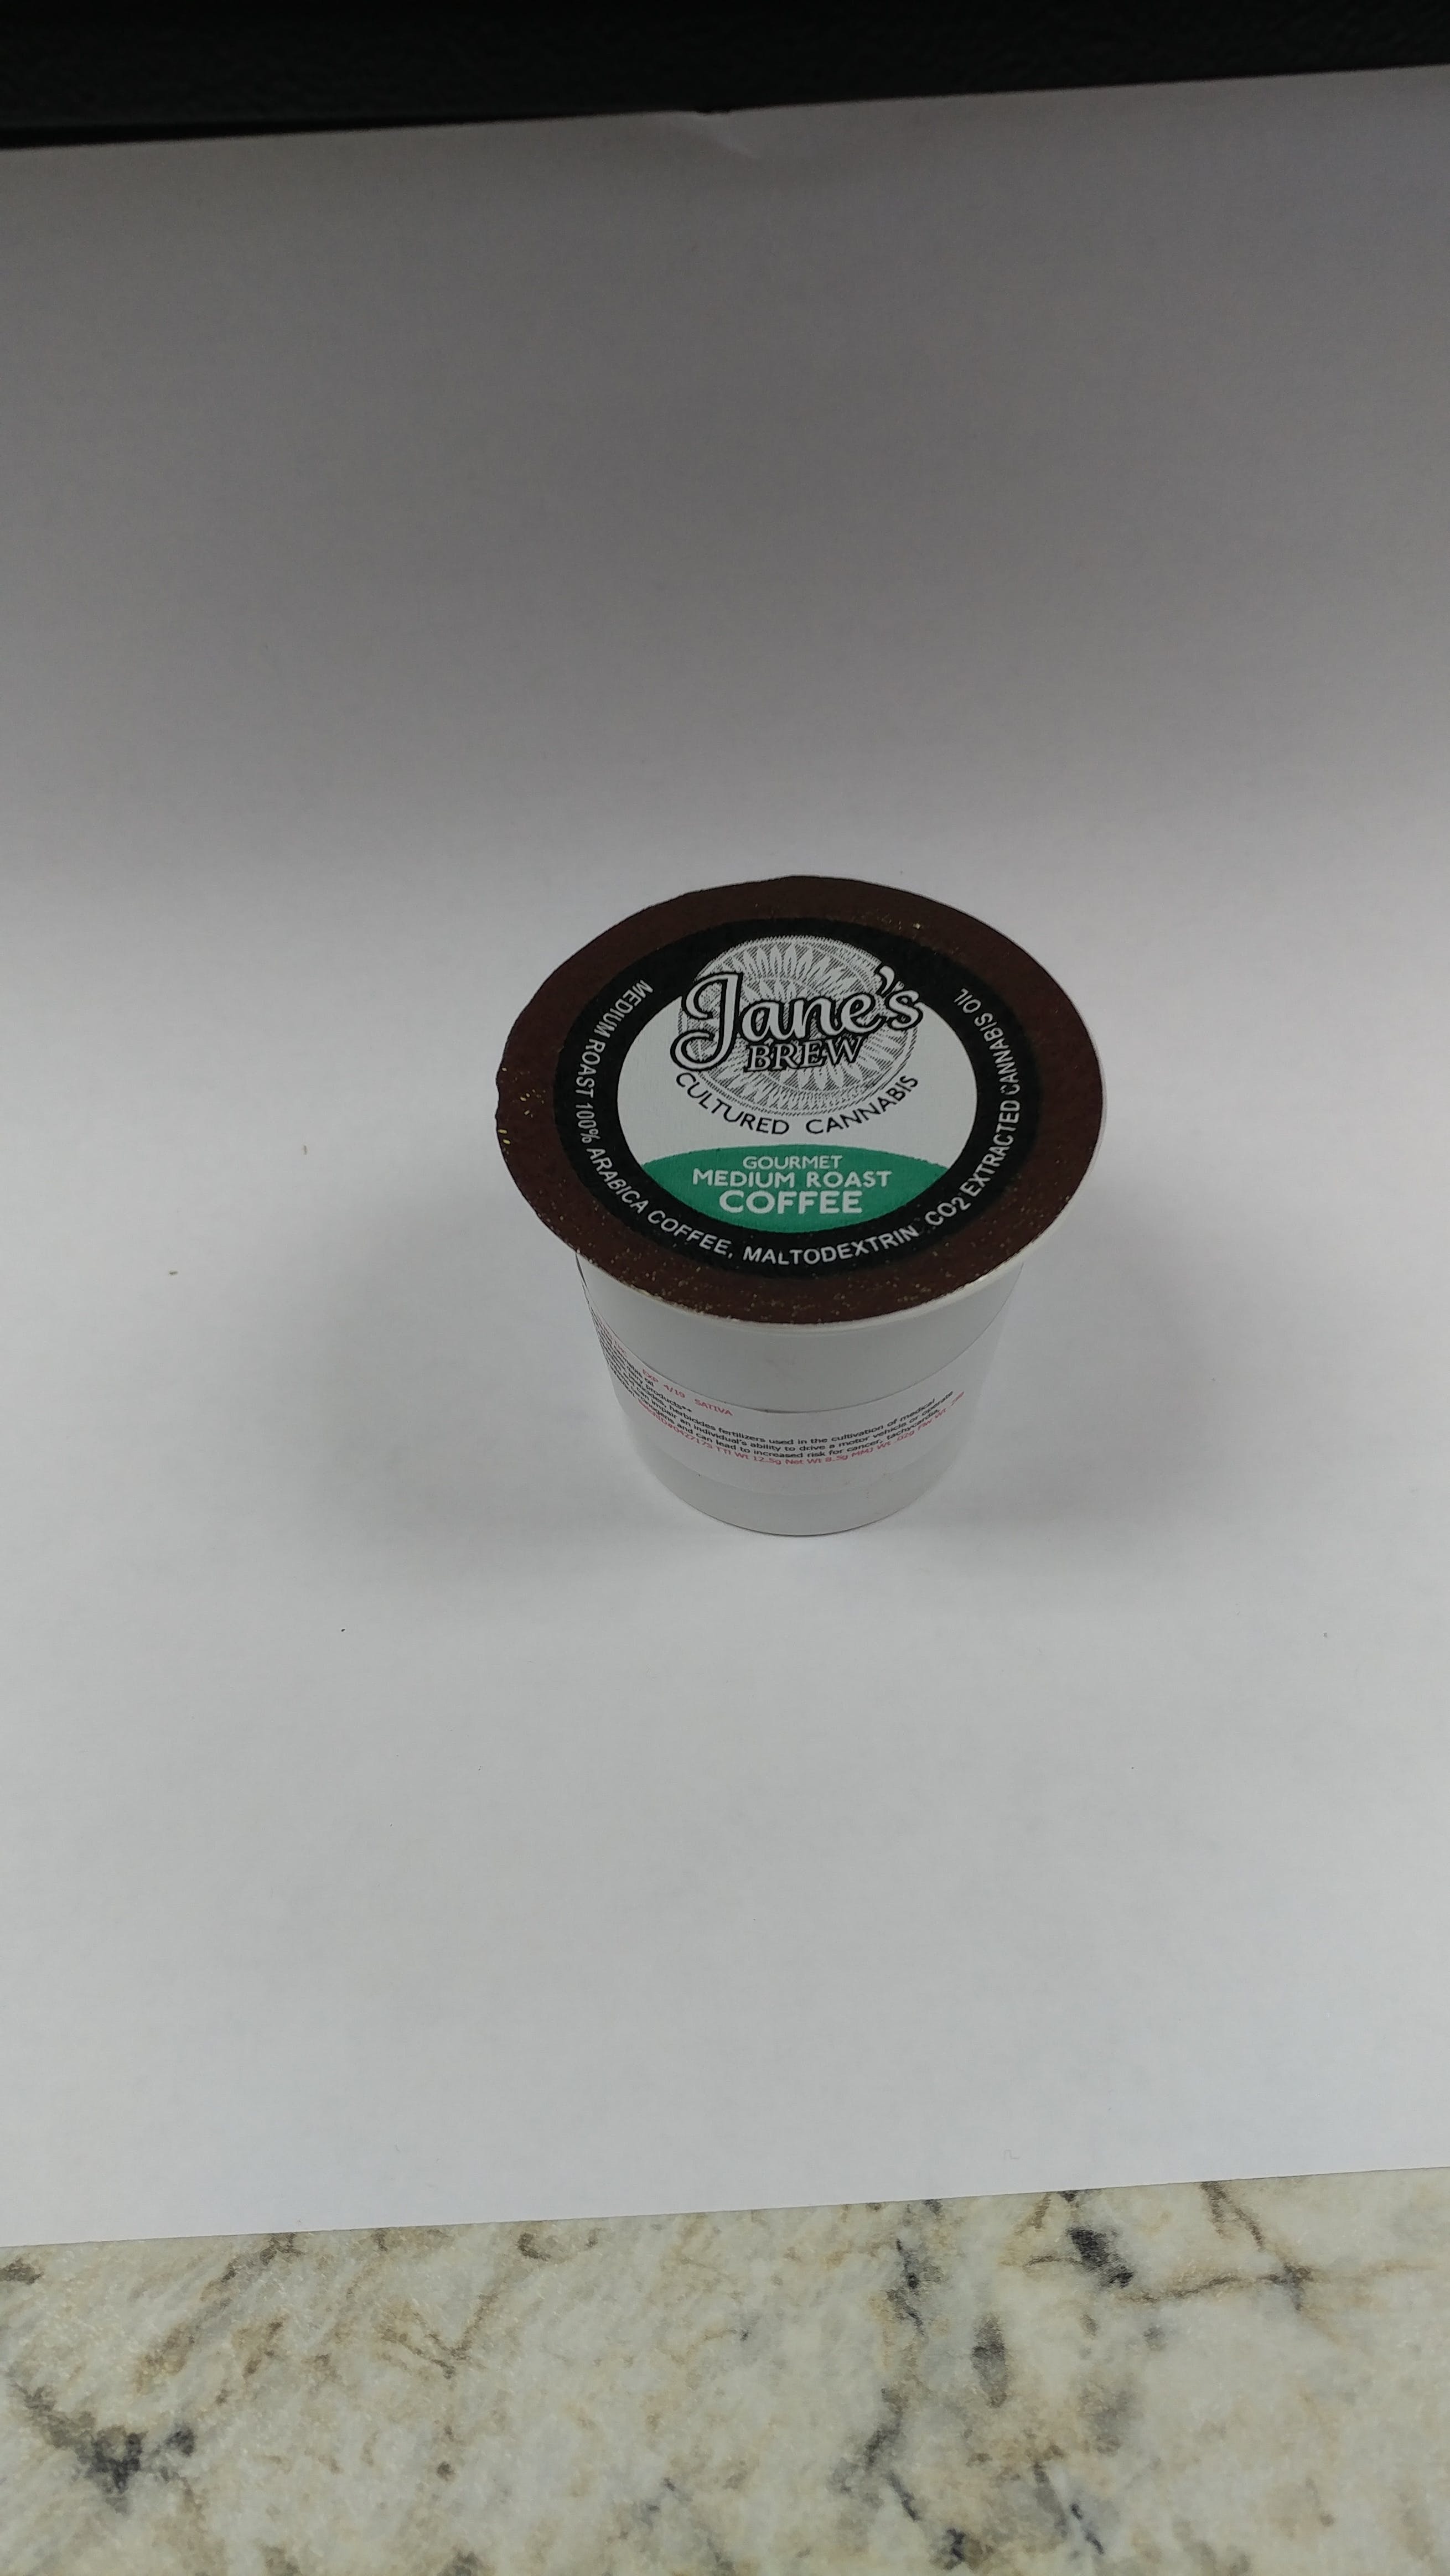 edible-house-of-jane-20mg-k-cup-coffee-pods